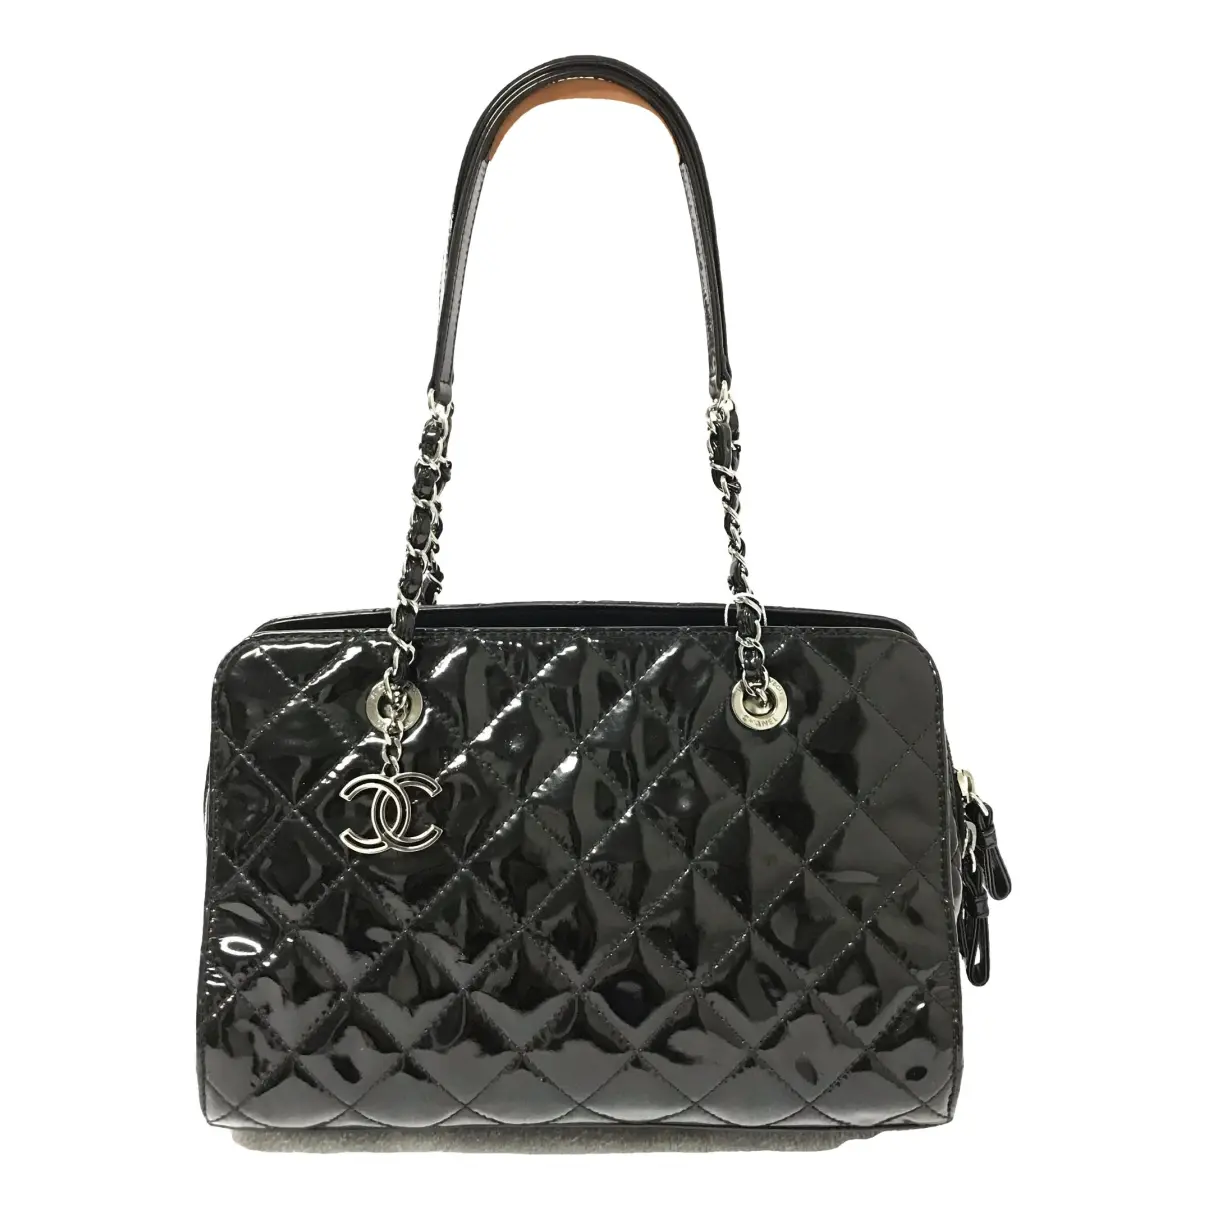 Trendy CC Quilted patent leather handbag